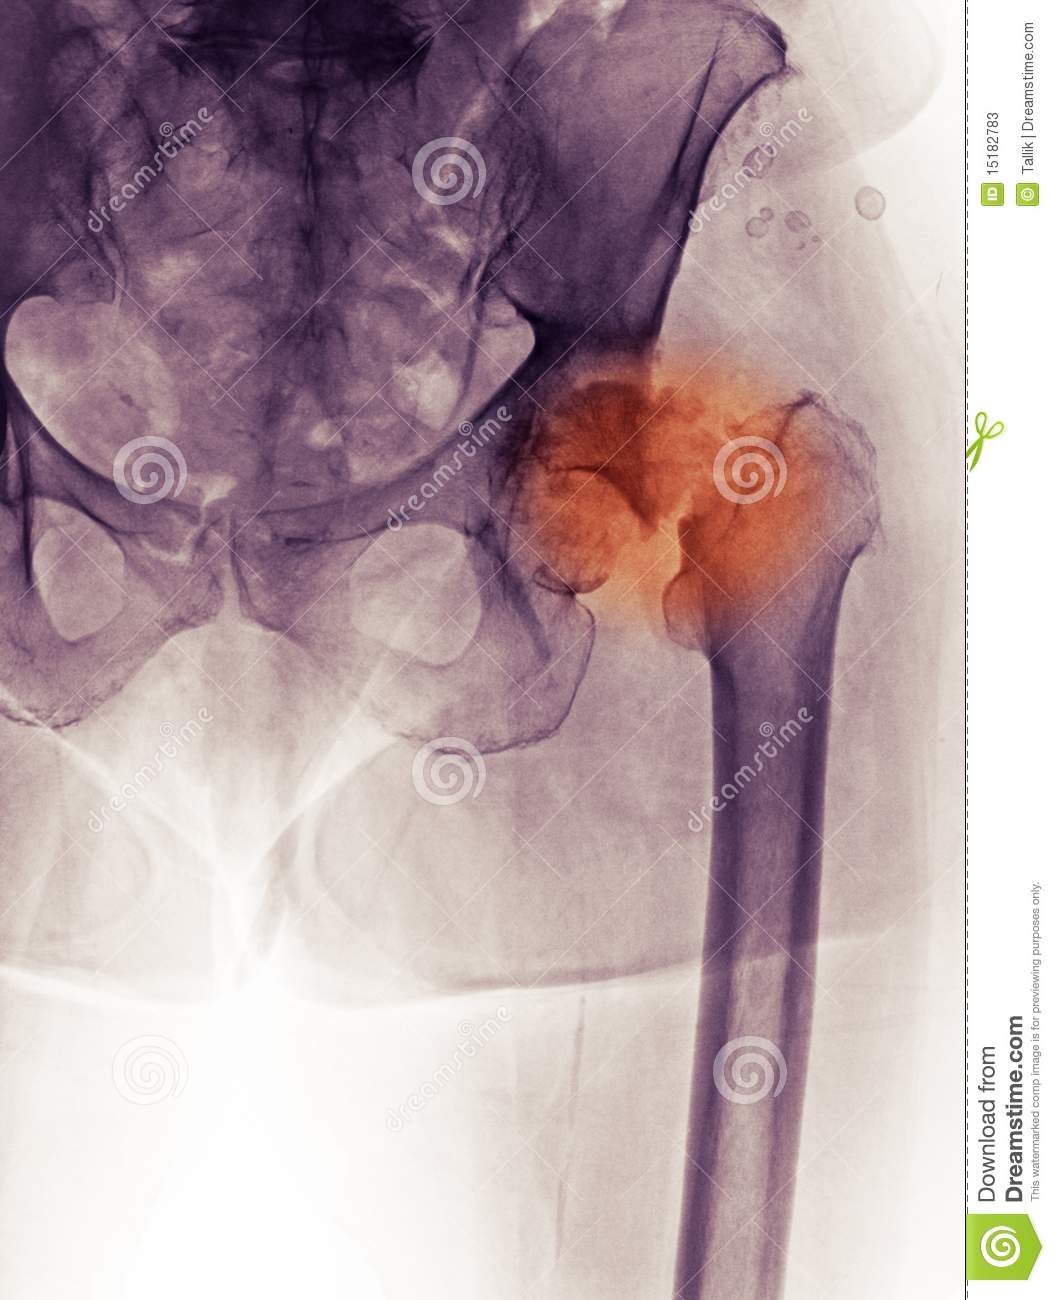 Stock Photos  Hip X Ray Fracture And Djd  Degenerative Joint D